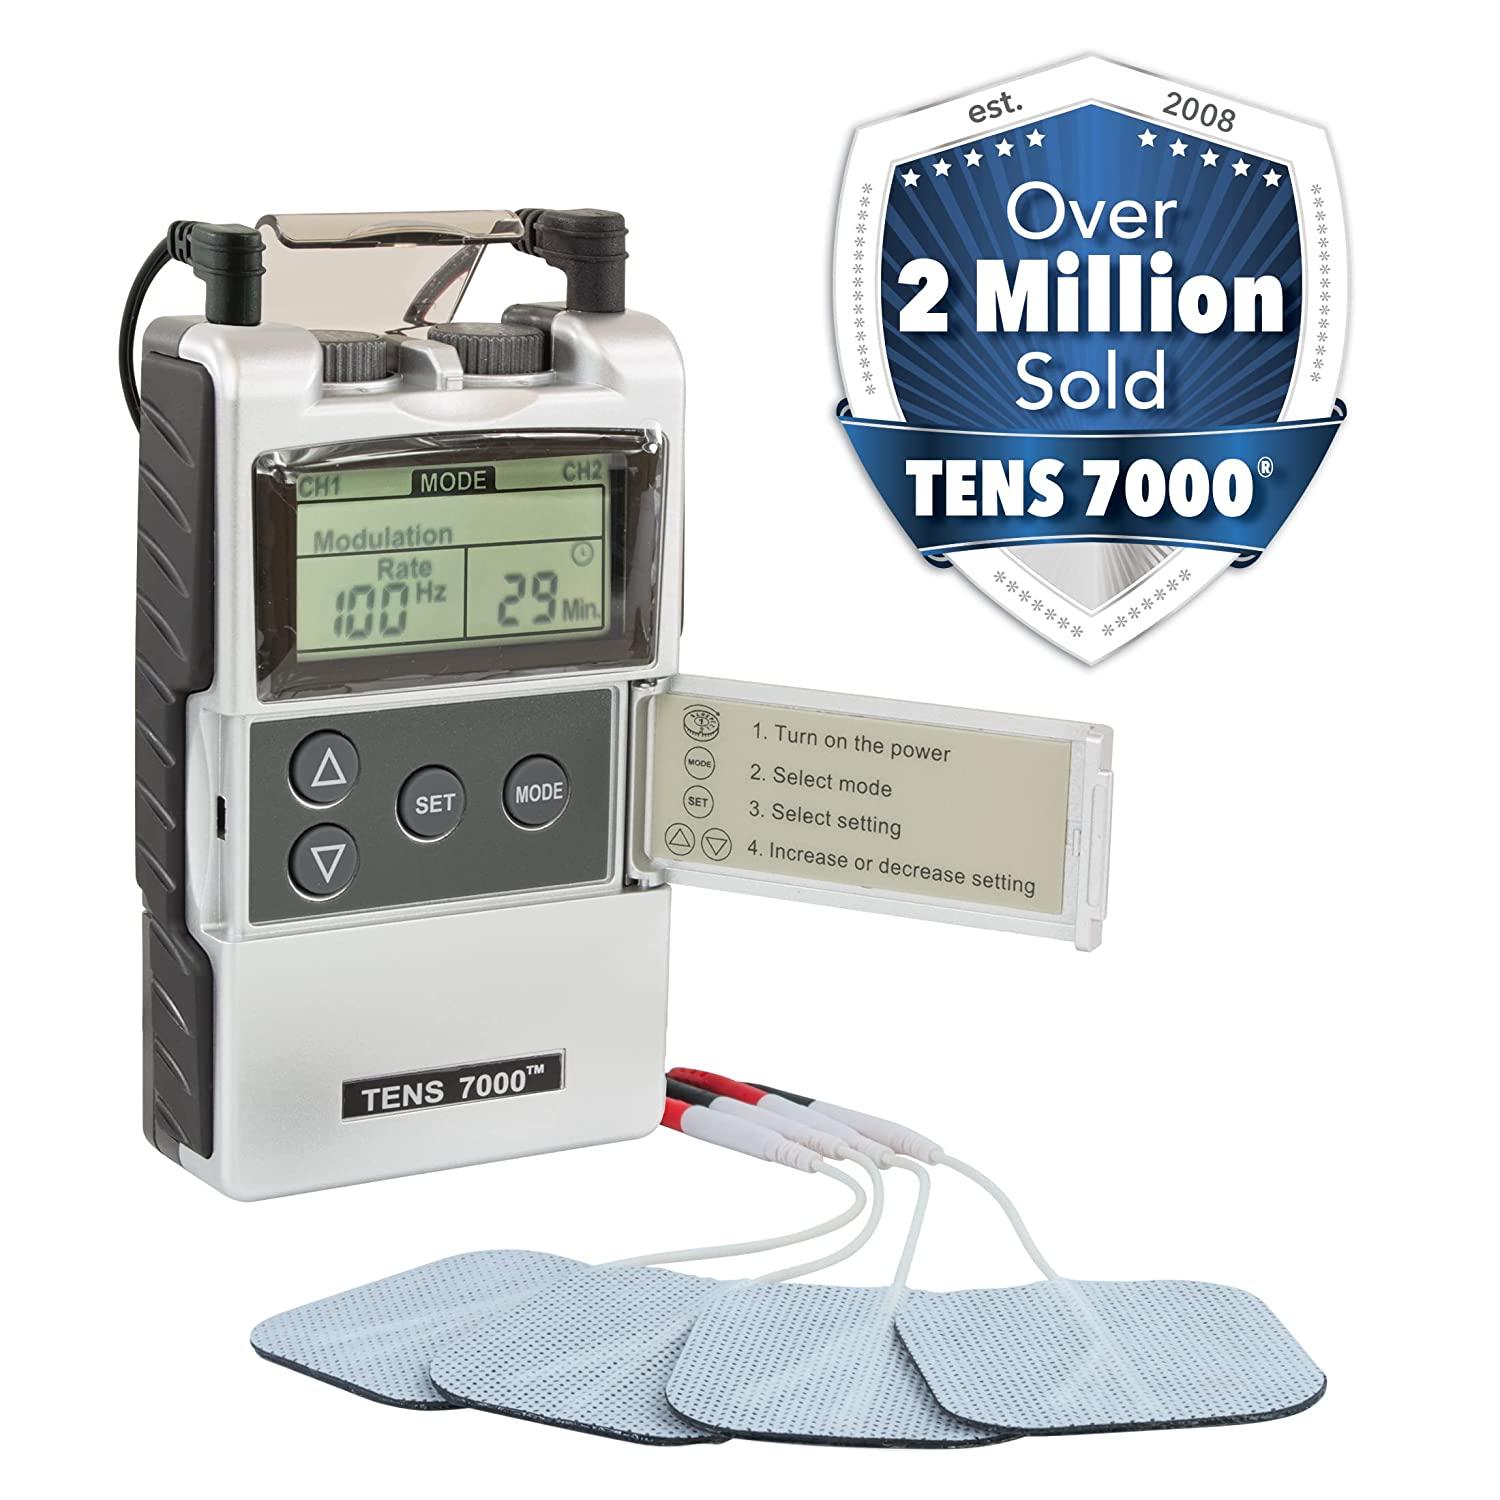 Tens 7000 Rechargeable Tens Unit Muscle Stimulator and Pain Relief Device - Advanced Tens Machine for Effective Back Pain Relief, Nerve Pain Relief